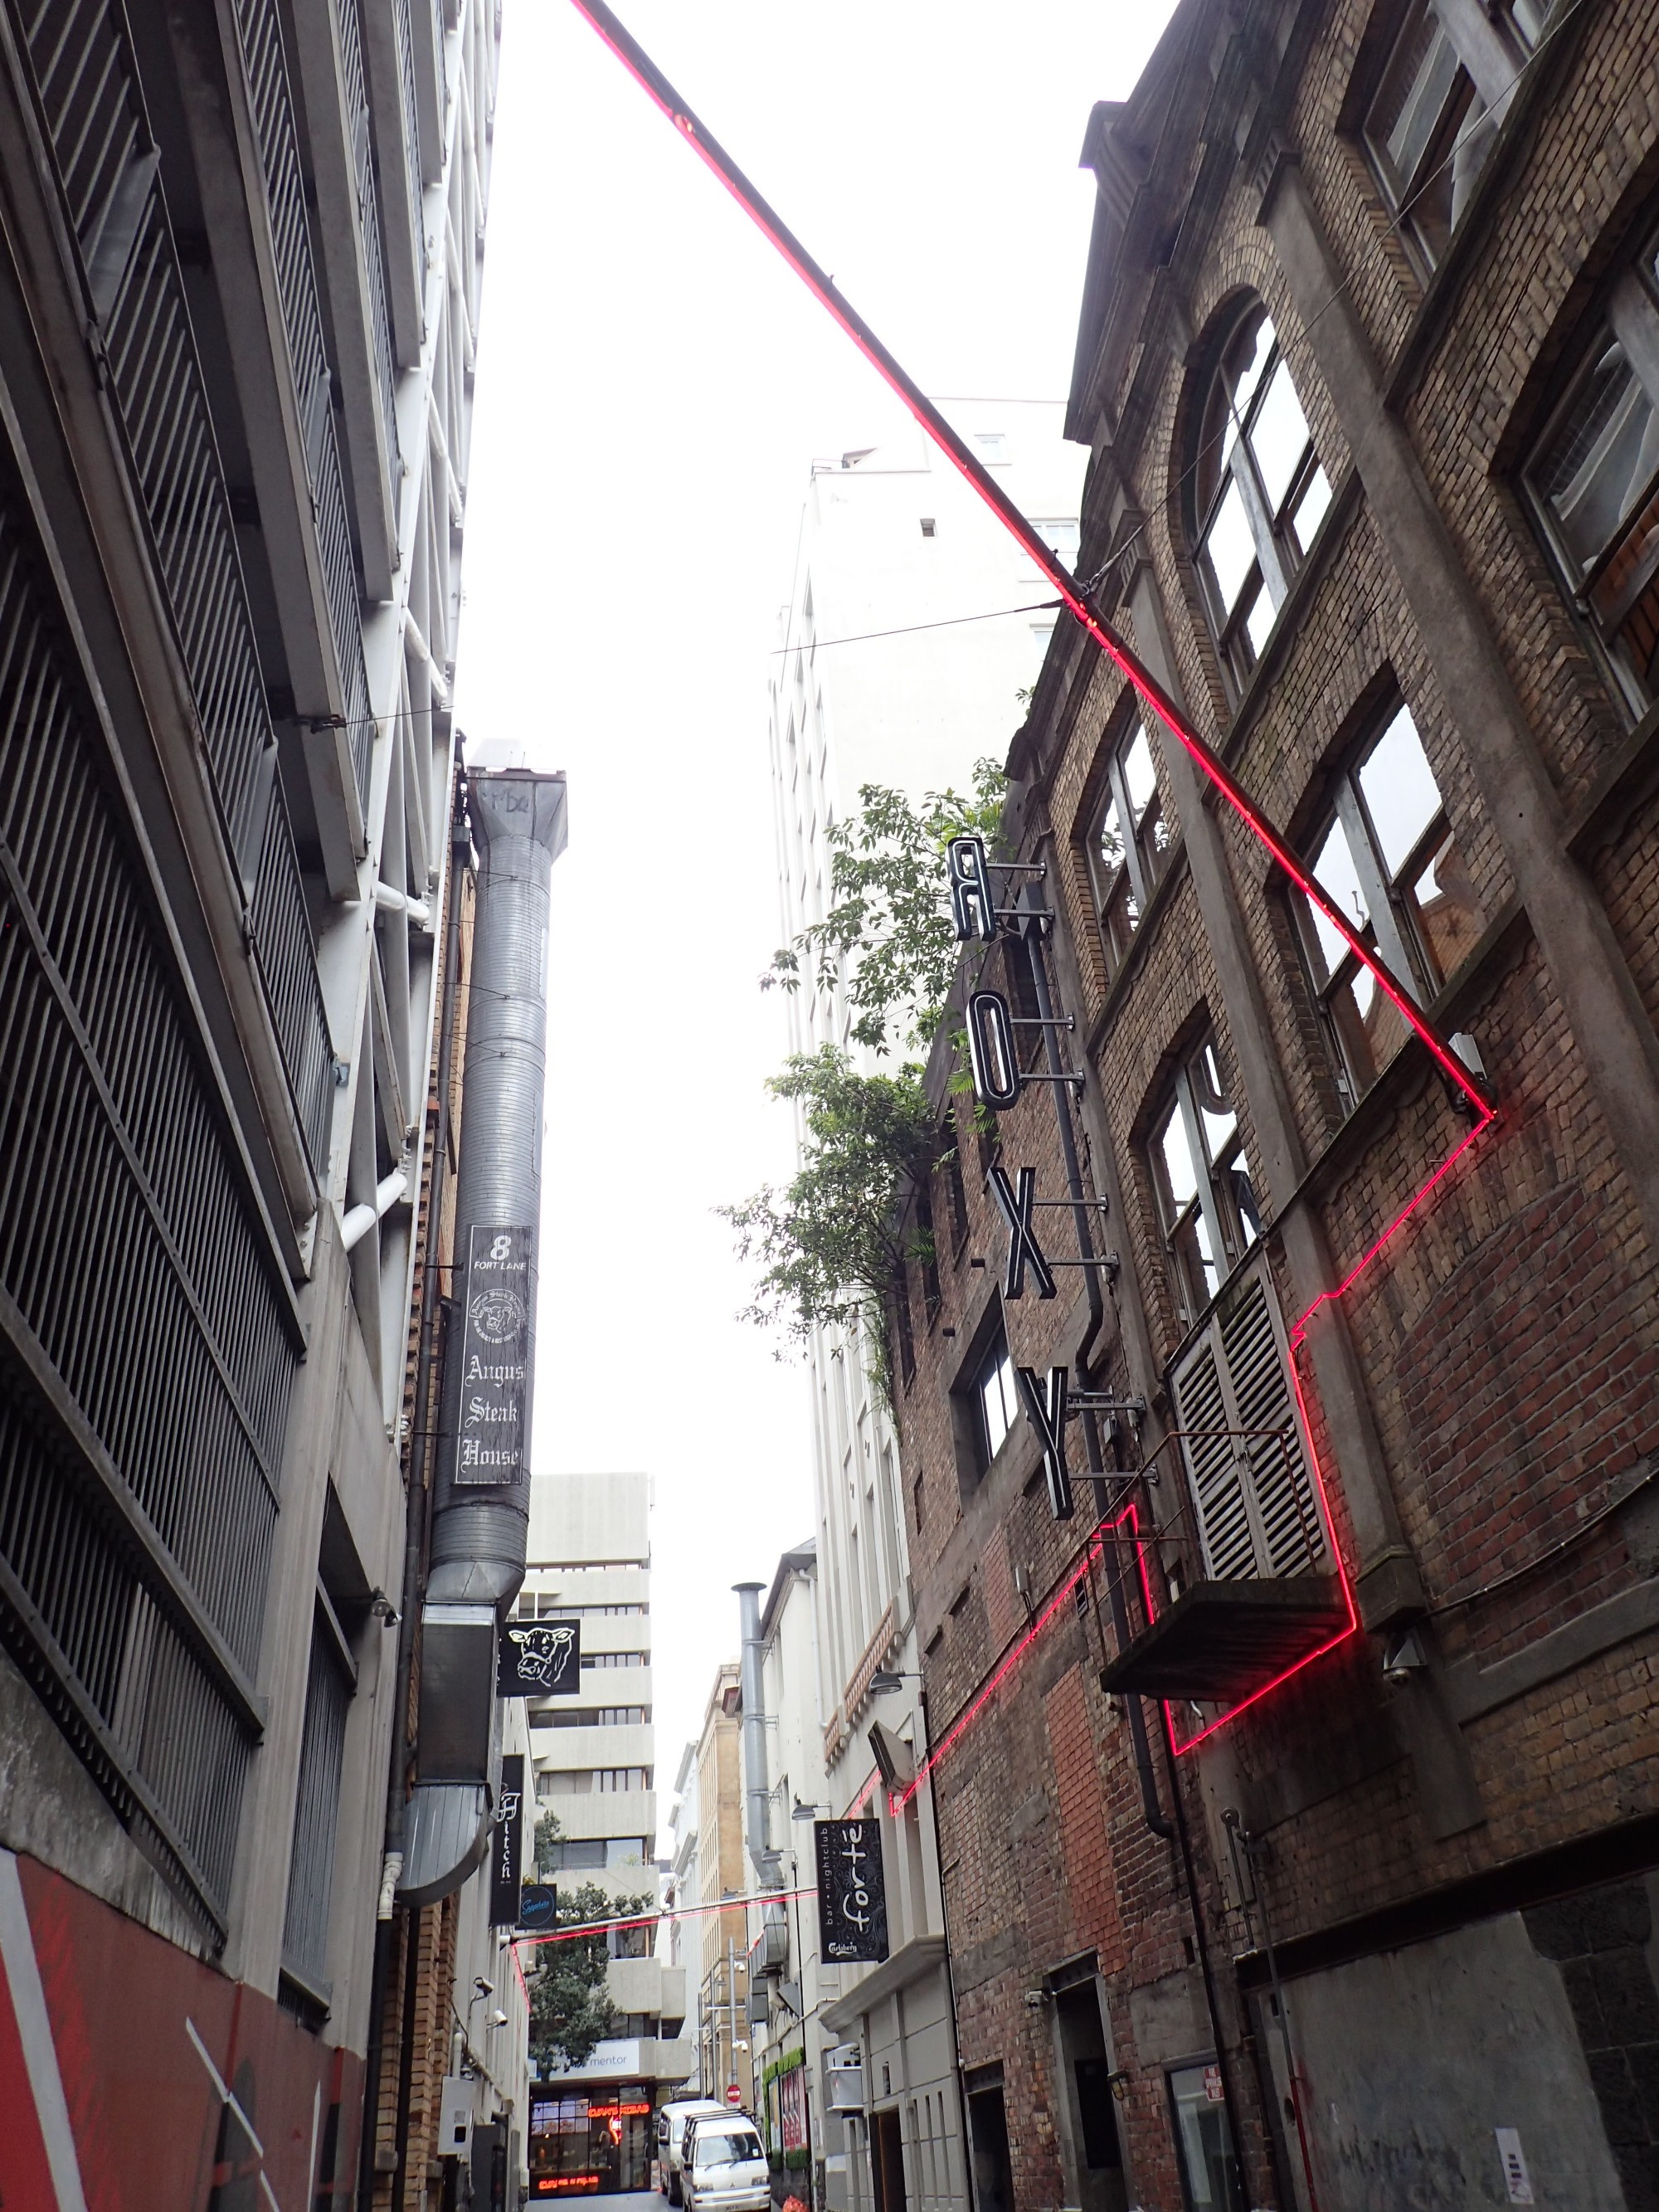 Old Red Light District of Auckland, New Zealand